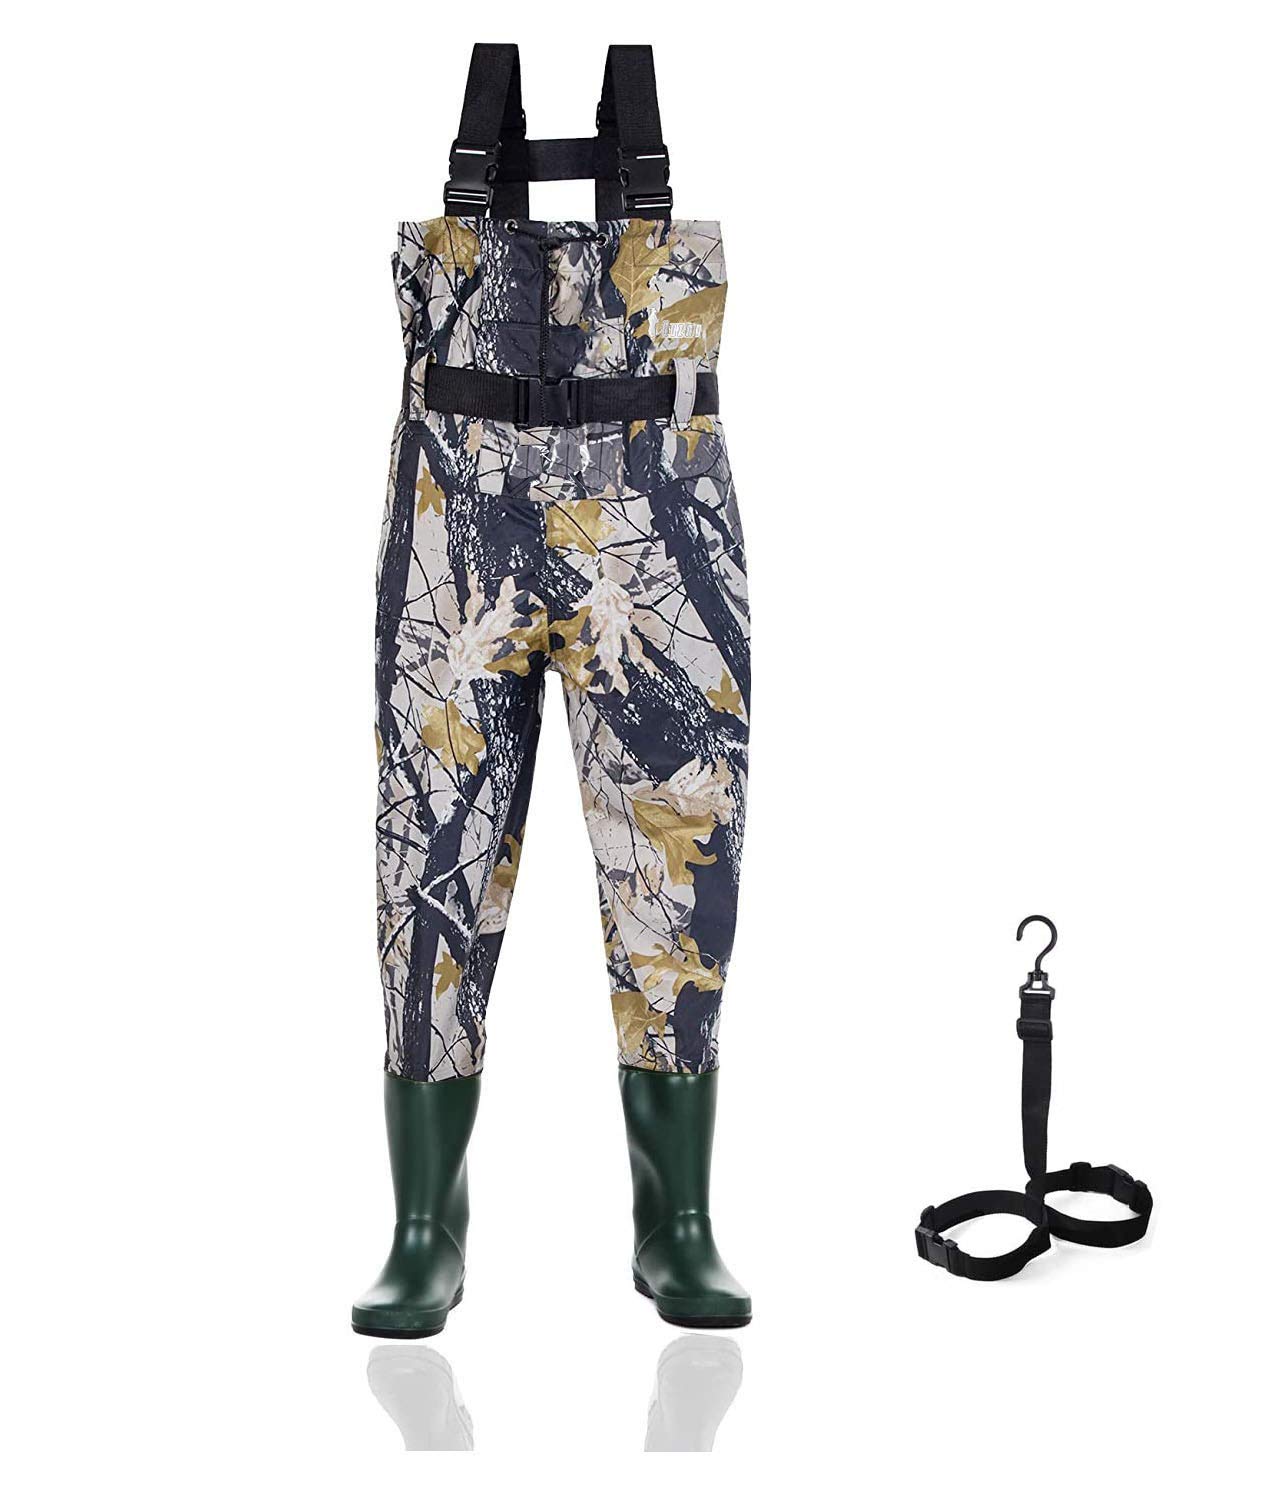 Kids Chest Waders for Toddler Children Waterproof Youth Fishing